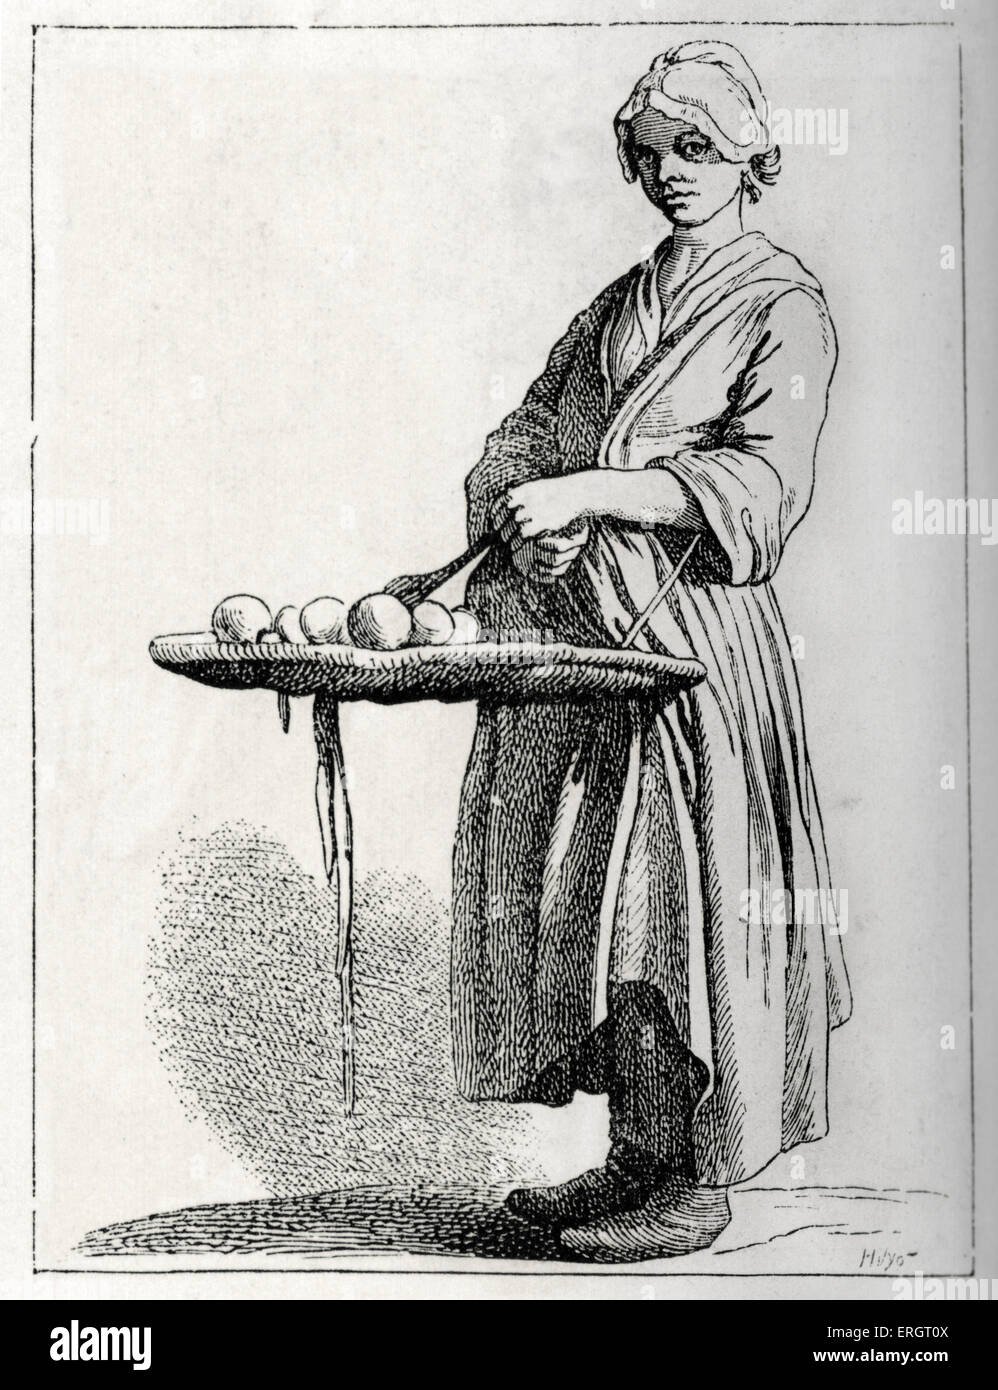 Daily life in French history: a fruit seller in 18th century Paris, France. Working class, poor, rustic, livelihood, during Stock Photo